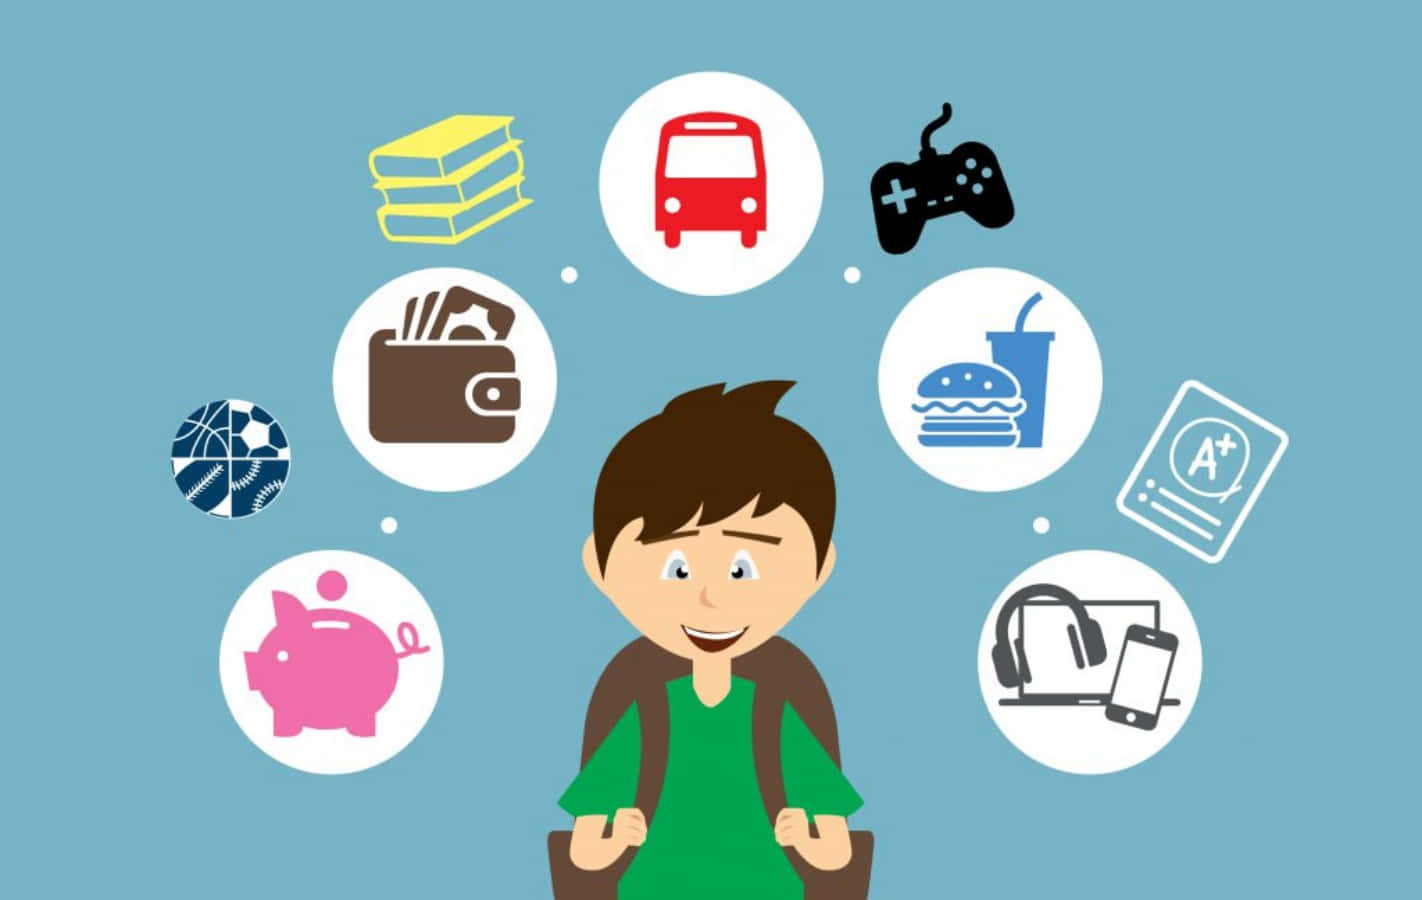 A Cartoon Of A Boy With A Backpack And Various Icons Around Him